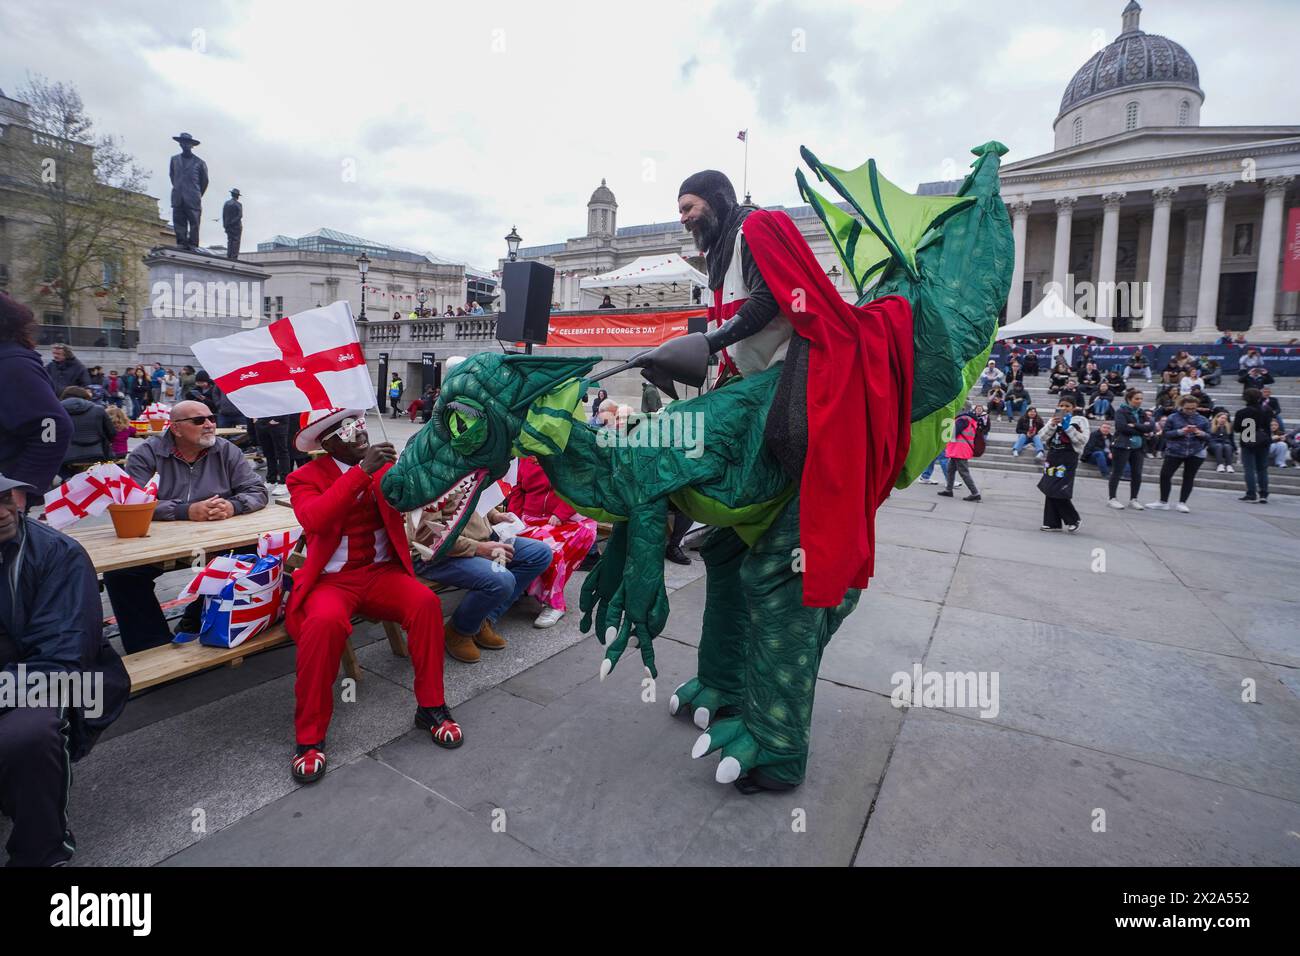 London 21 April 2024 .A man dressed as Saint George riding an inflatable dragon entertains the crowds  in  Trafalgar Square during the Saint George's celebrations. Credit: amer ghazzal/Alamy Live News Stock Photo